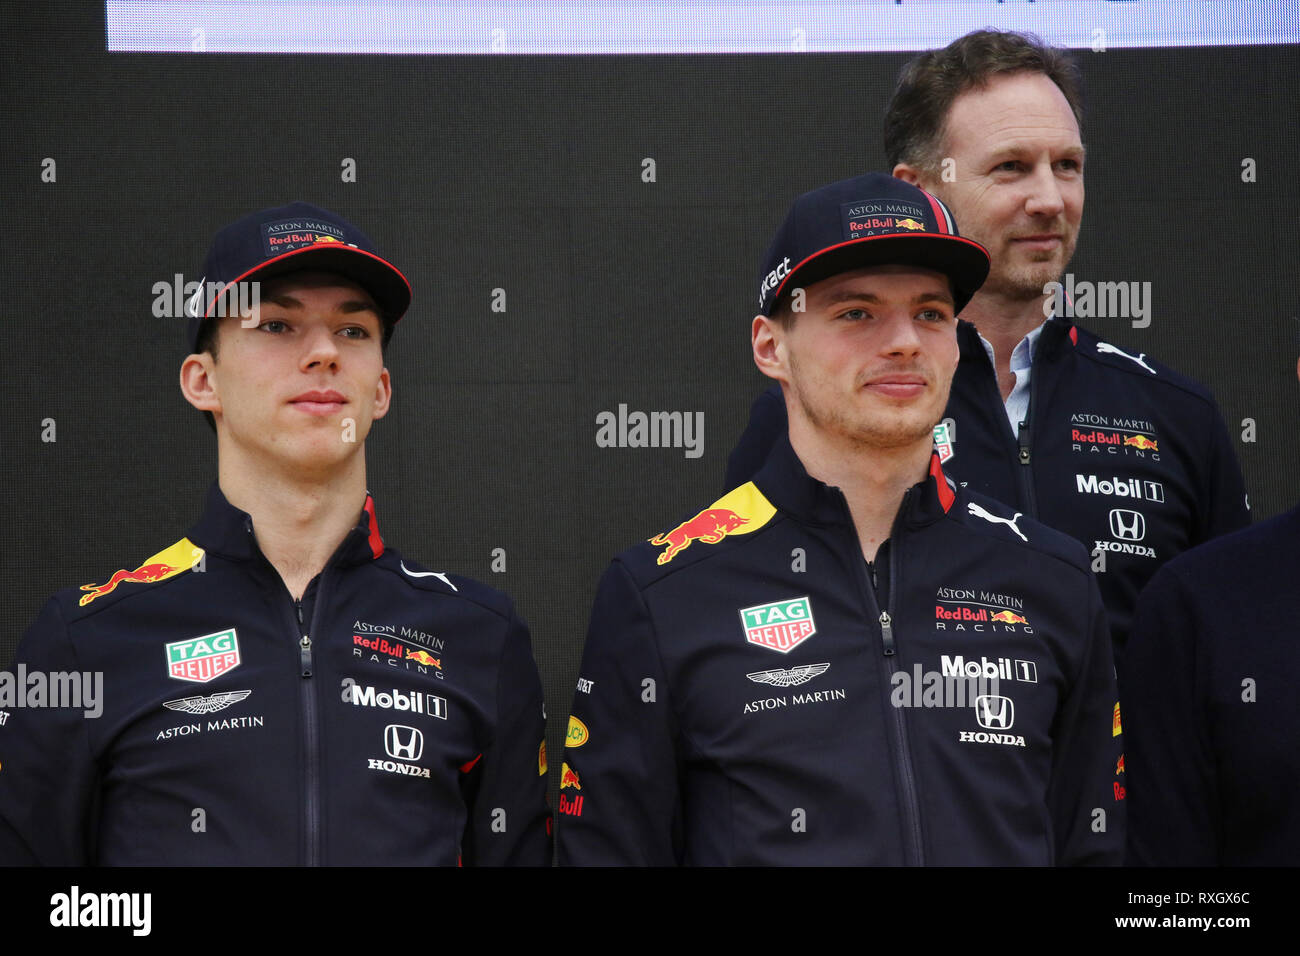 Tokyo, Japan. 9th Mar, (Front row) Red Bull Racing drivers Pierre Gasly and Max Verstappen Red Bull Racing leader Christian Horner pose for photo after their press conference of